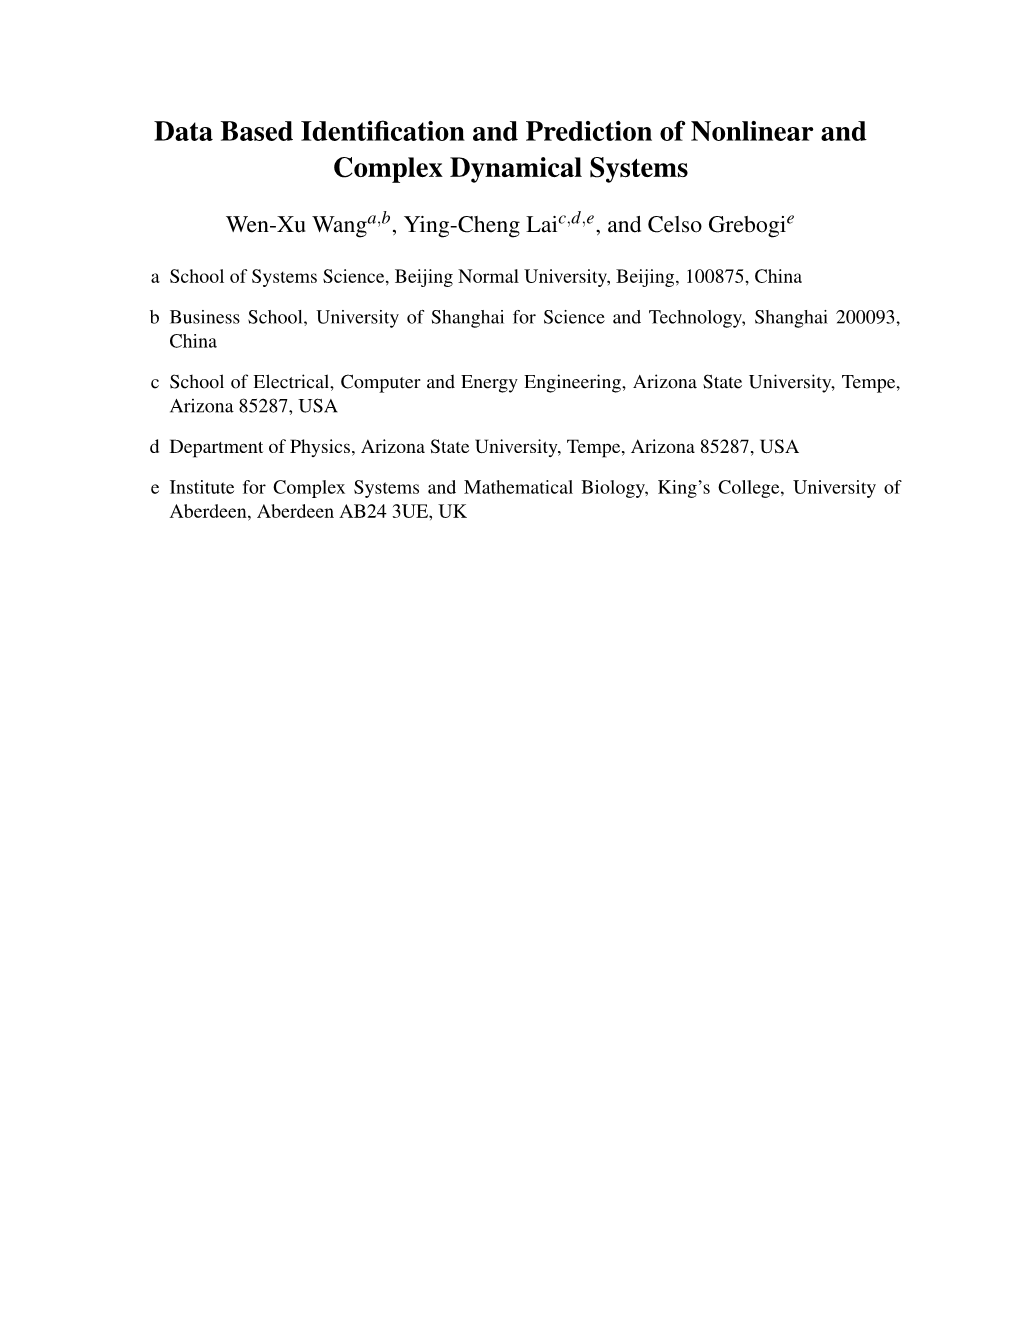 Data Based Identification and Prediction of Nonlinear and Complex Dynamical Systems